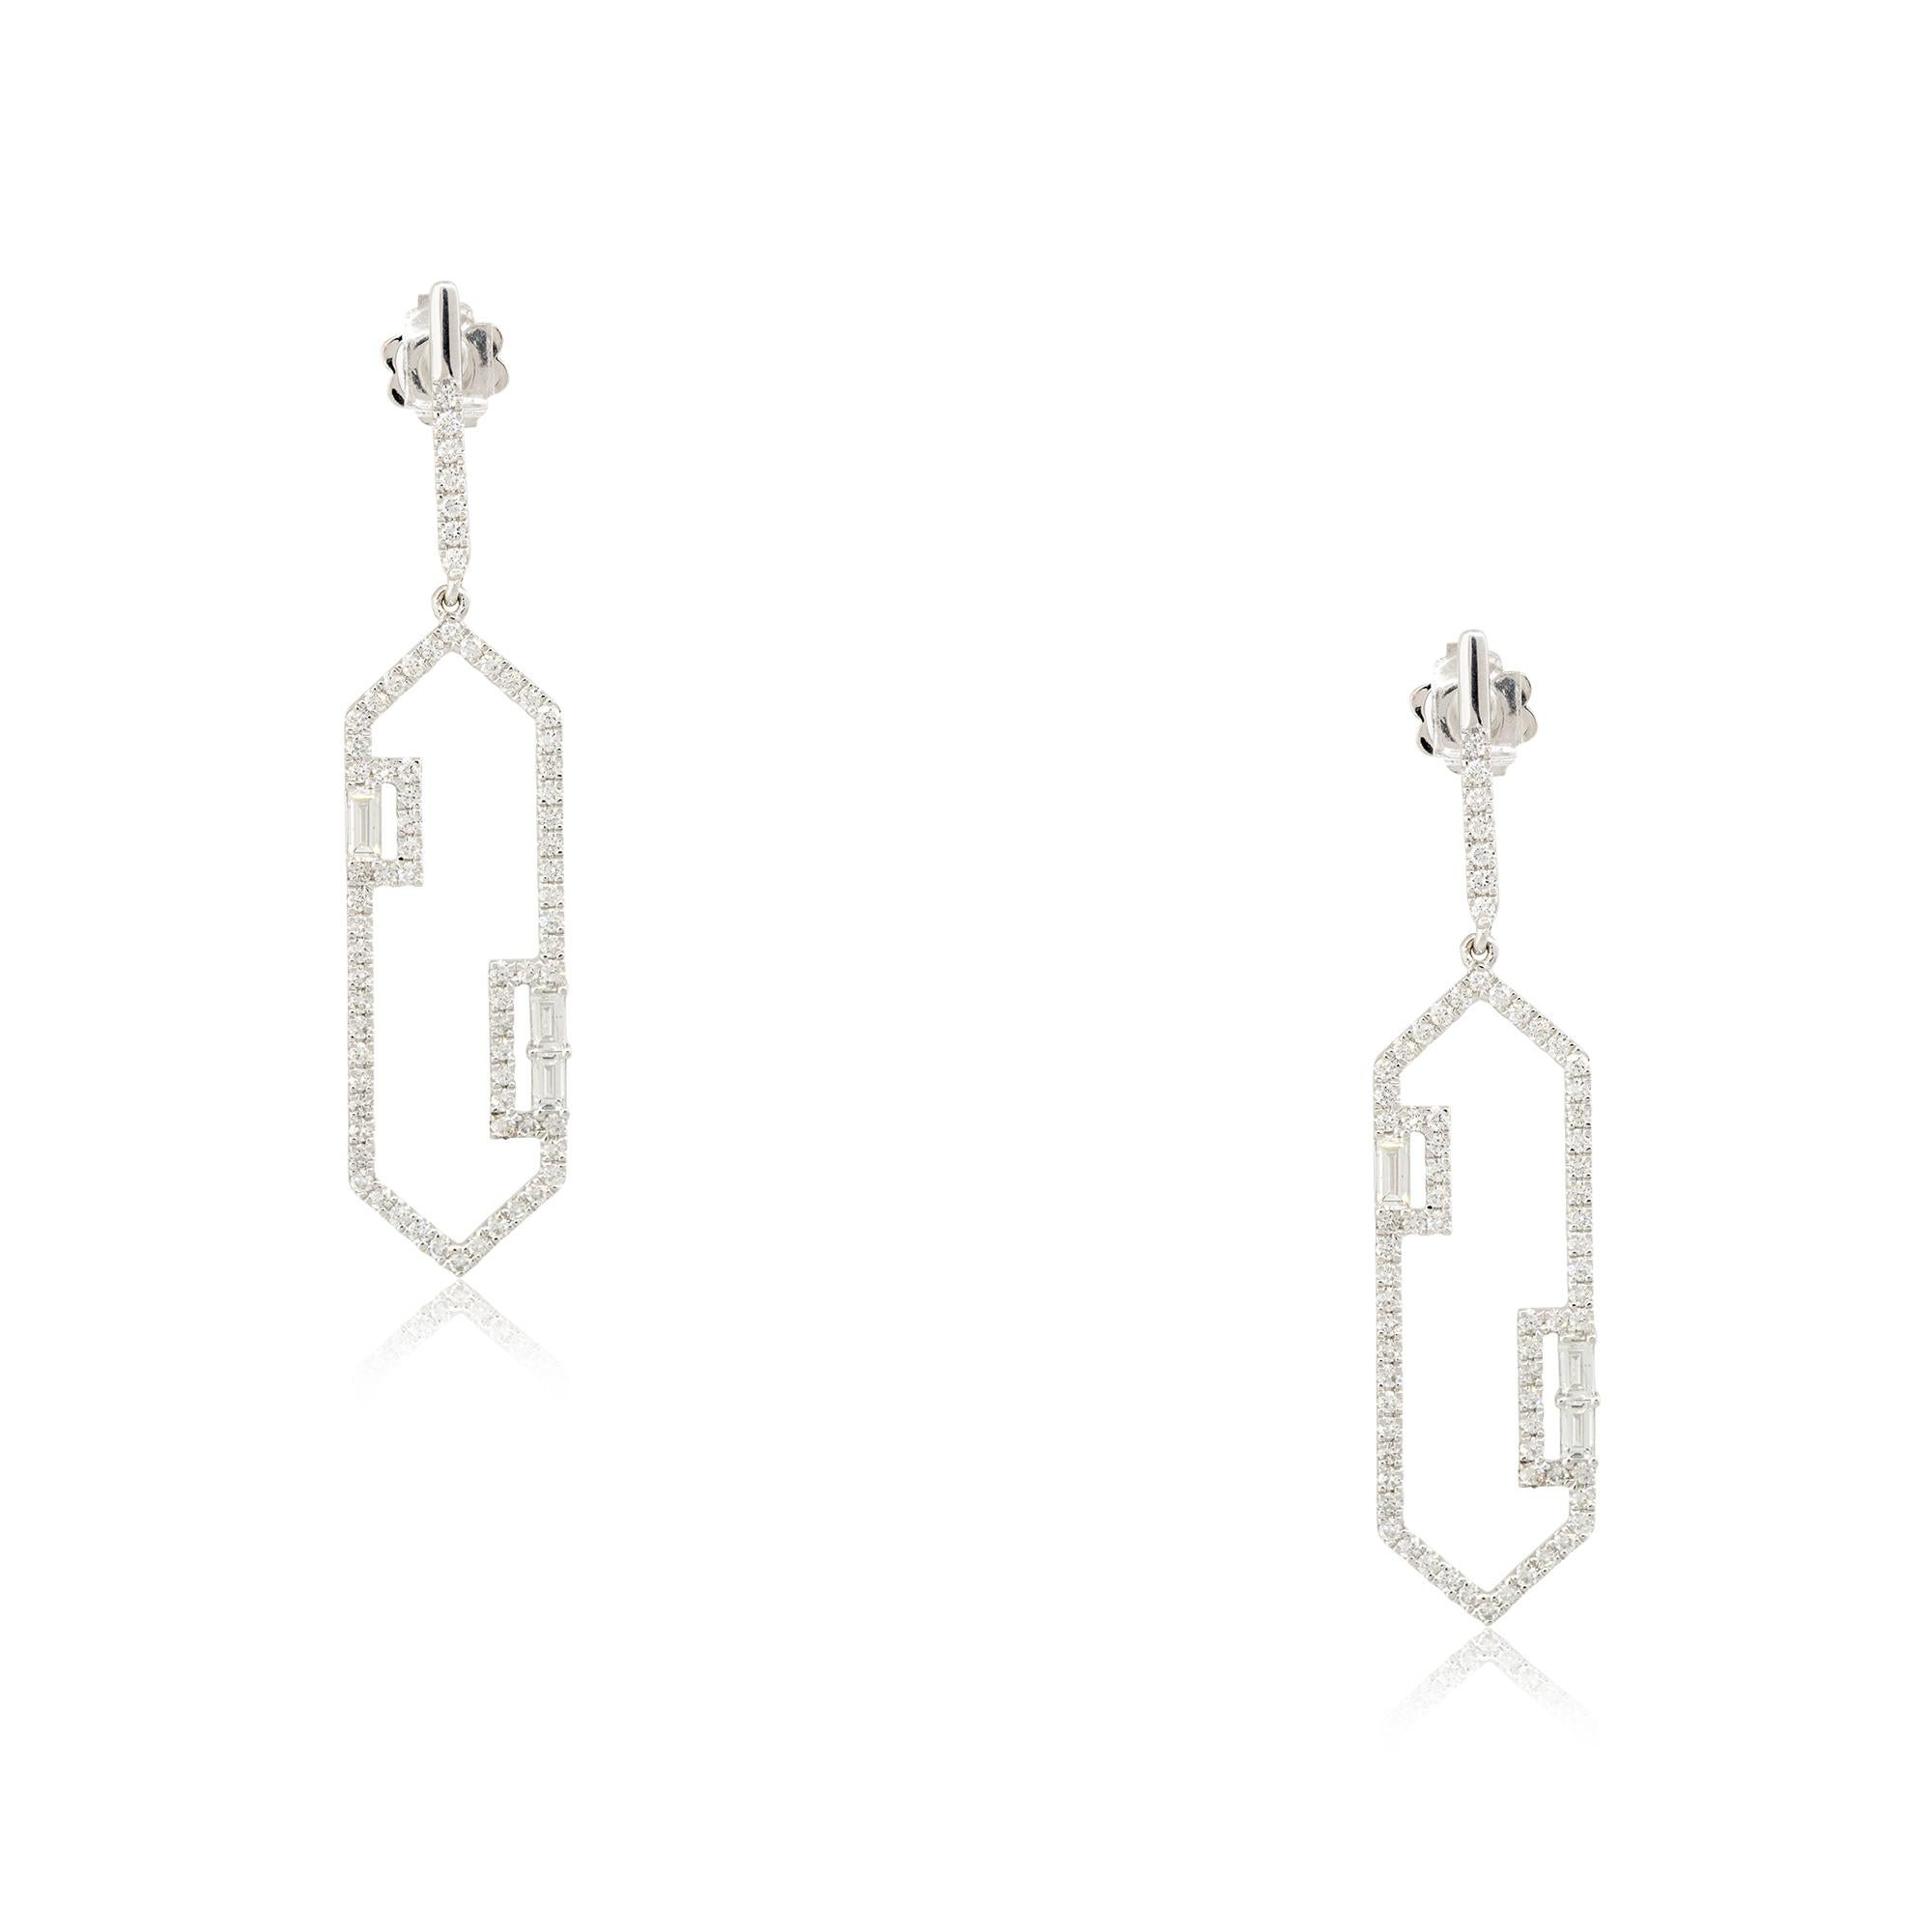 14k White Gold 1.49ctw Emerald Cut Diamond Drop Oblong Earrings

Material: 14k White Gold
Diamond Details: Diamonds are approximately 1.49ctw of Emerald and Round Brilliant cut Diamonds. There are 3 larger Emerald cut diamonds in each earring, along